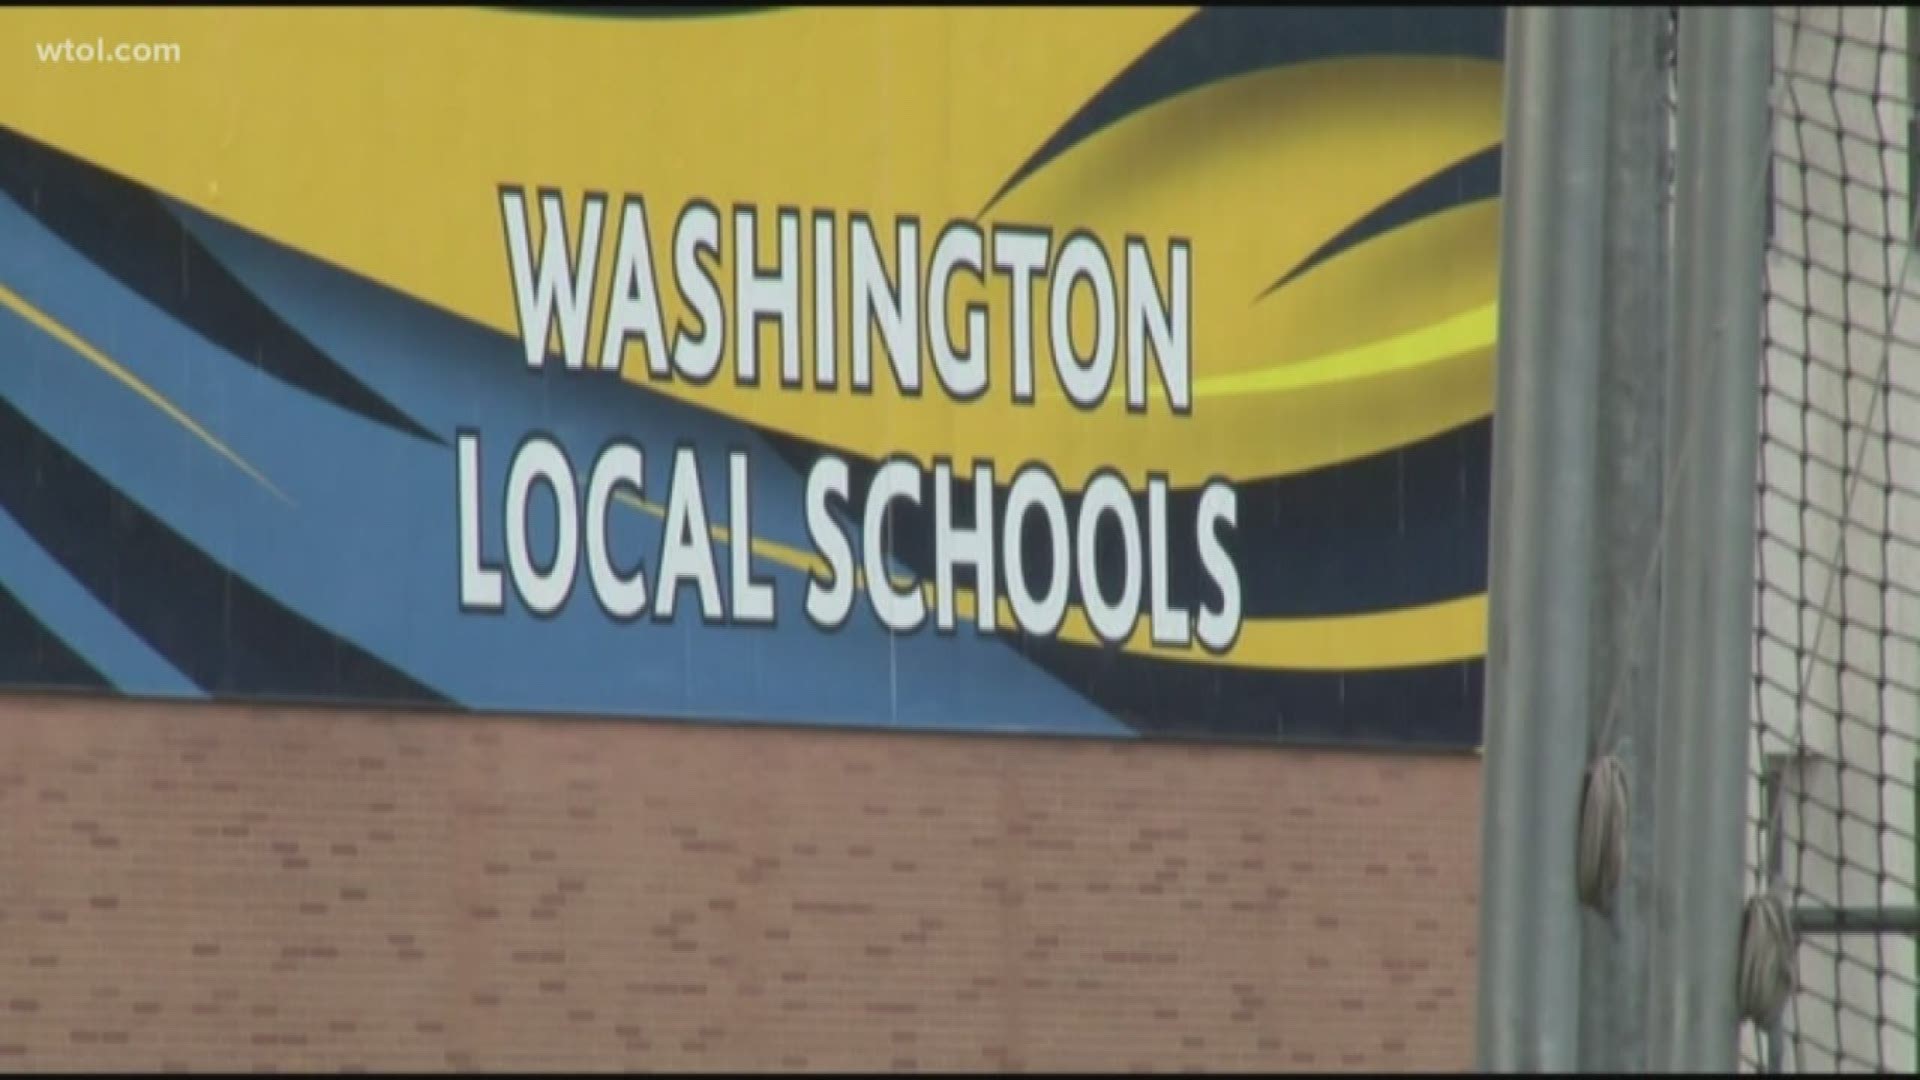 A big feat for Washington Local Schools from their report cards show an area where their teachers are excelling.